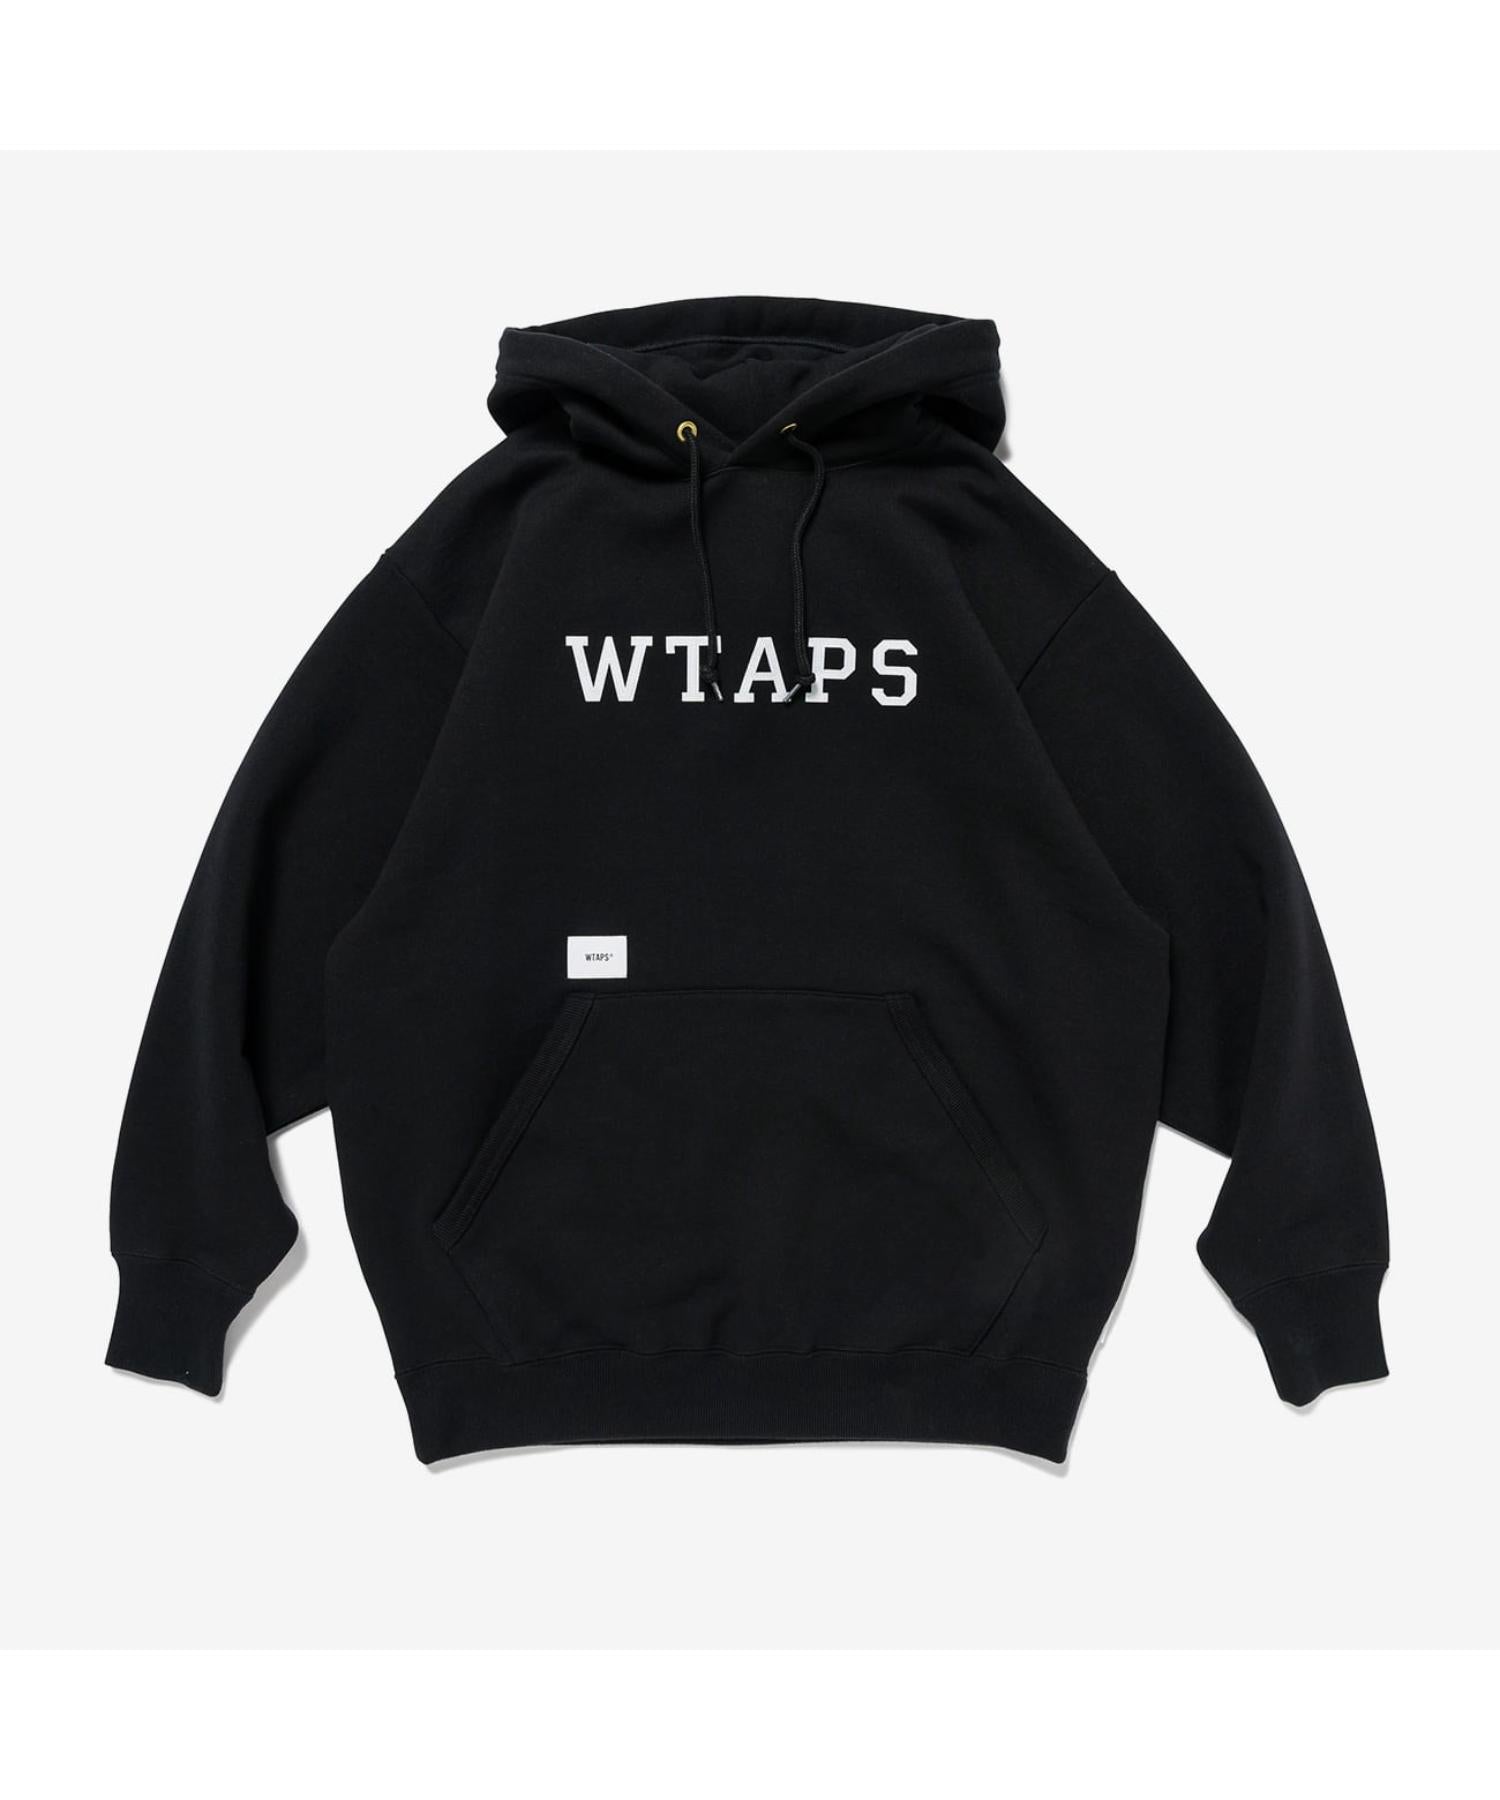 WTAPS ACADEMY SWEATER COTTON. COLLEGEダブルタップス